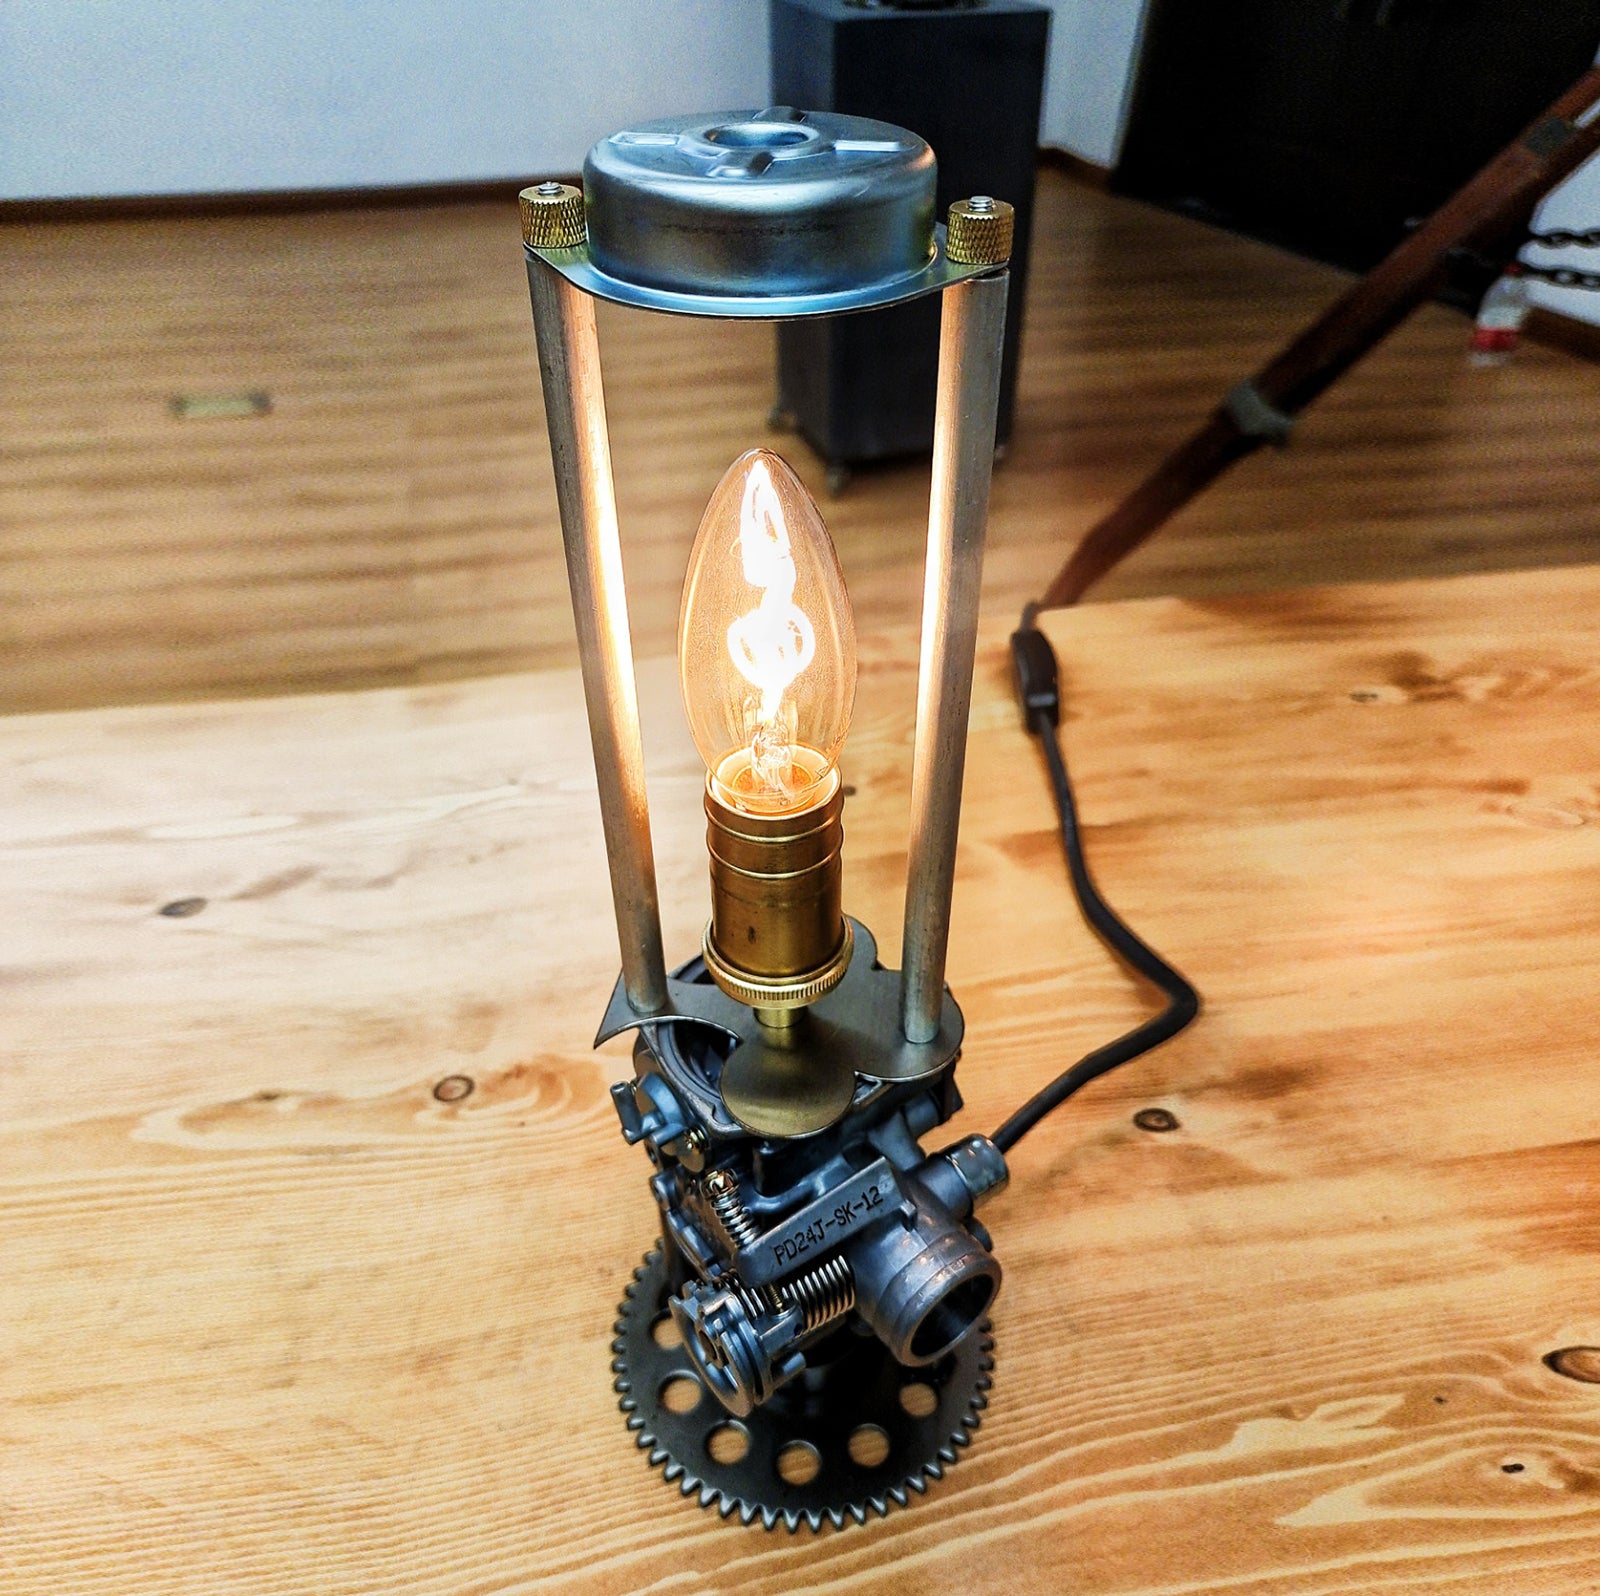 Steampunk Cool Lamp Industrial Metal Model for Home Decor